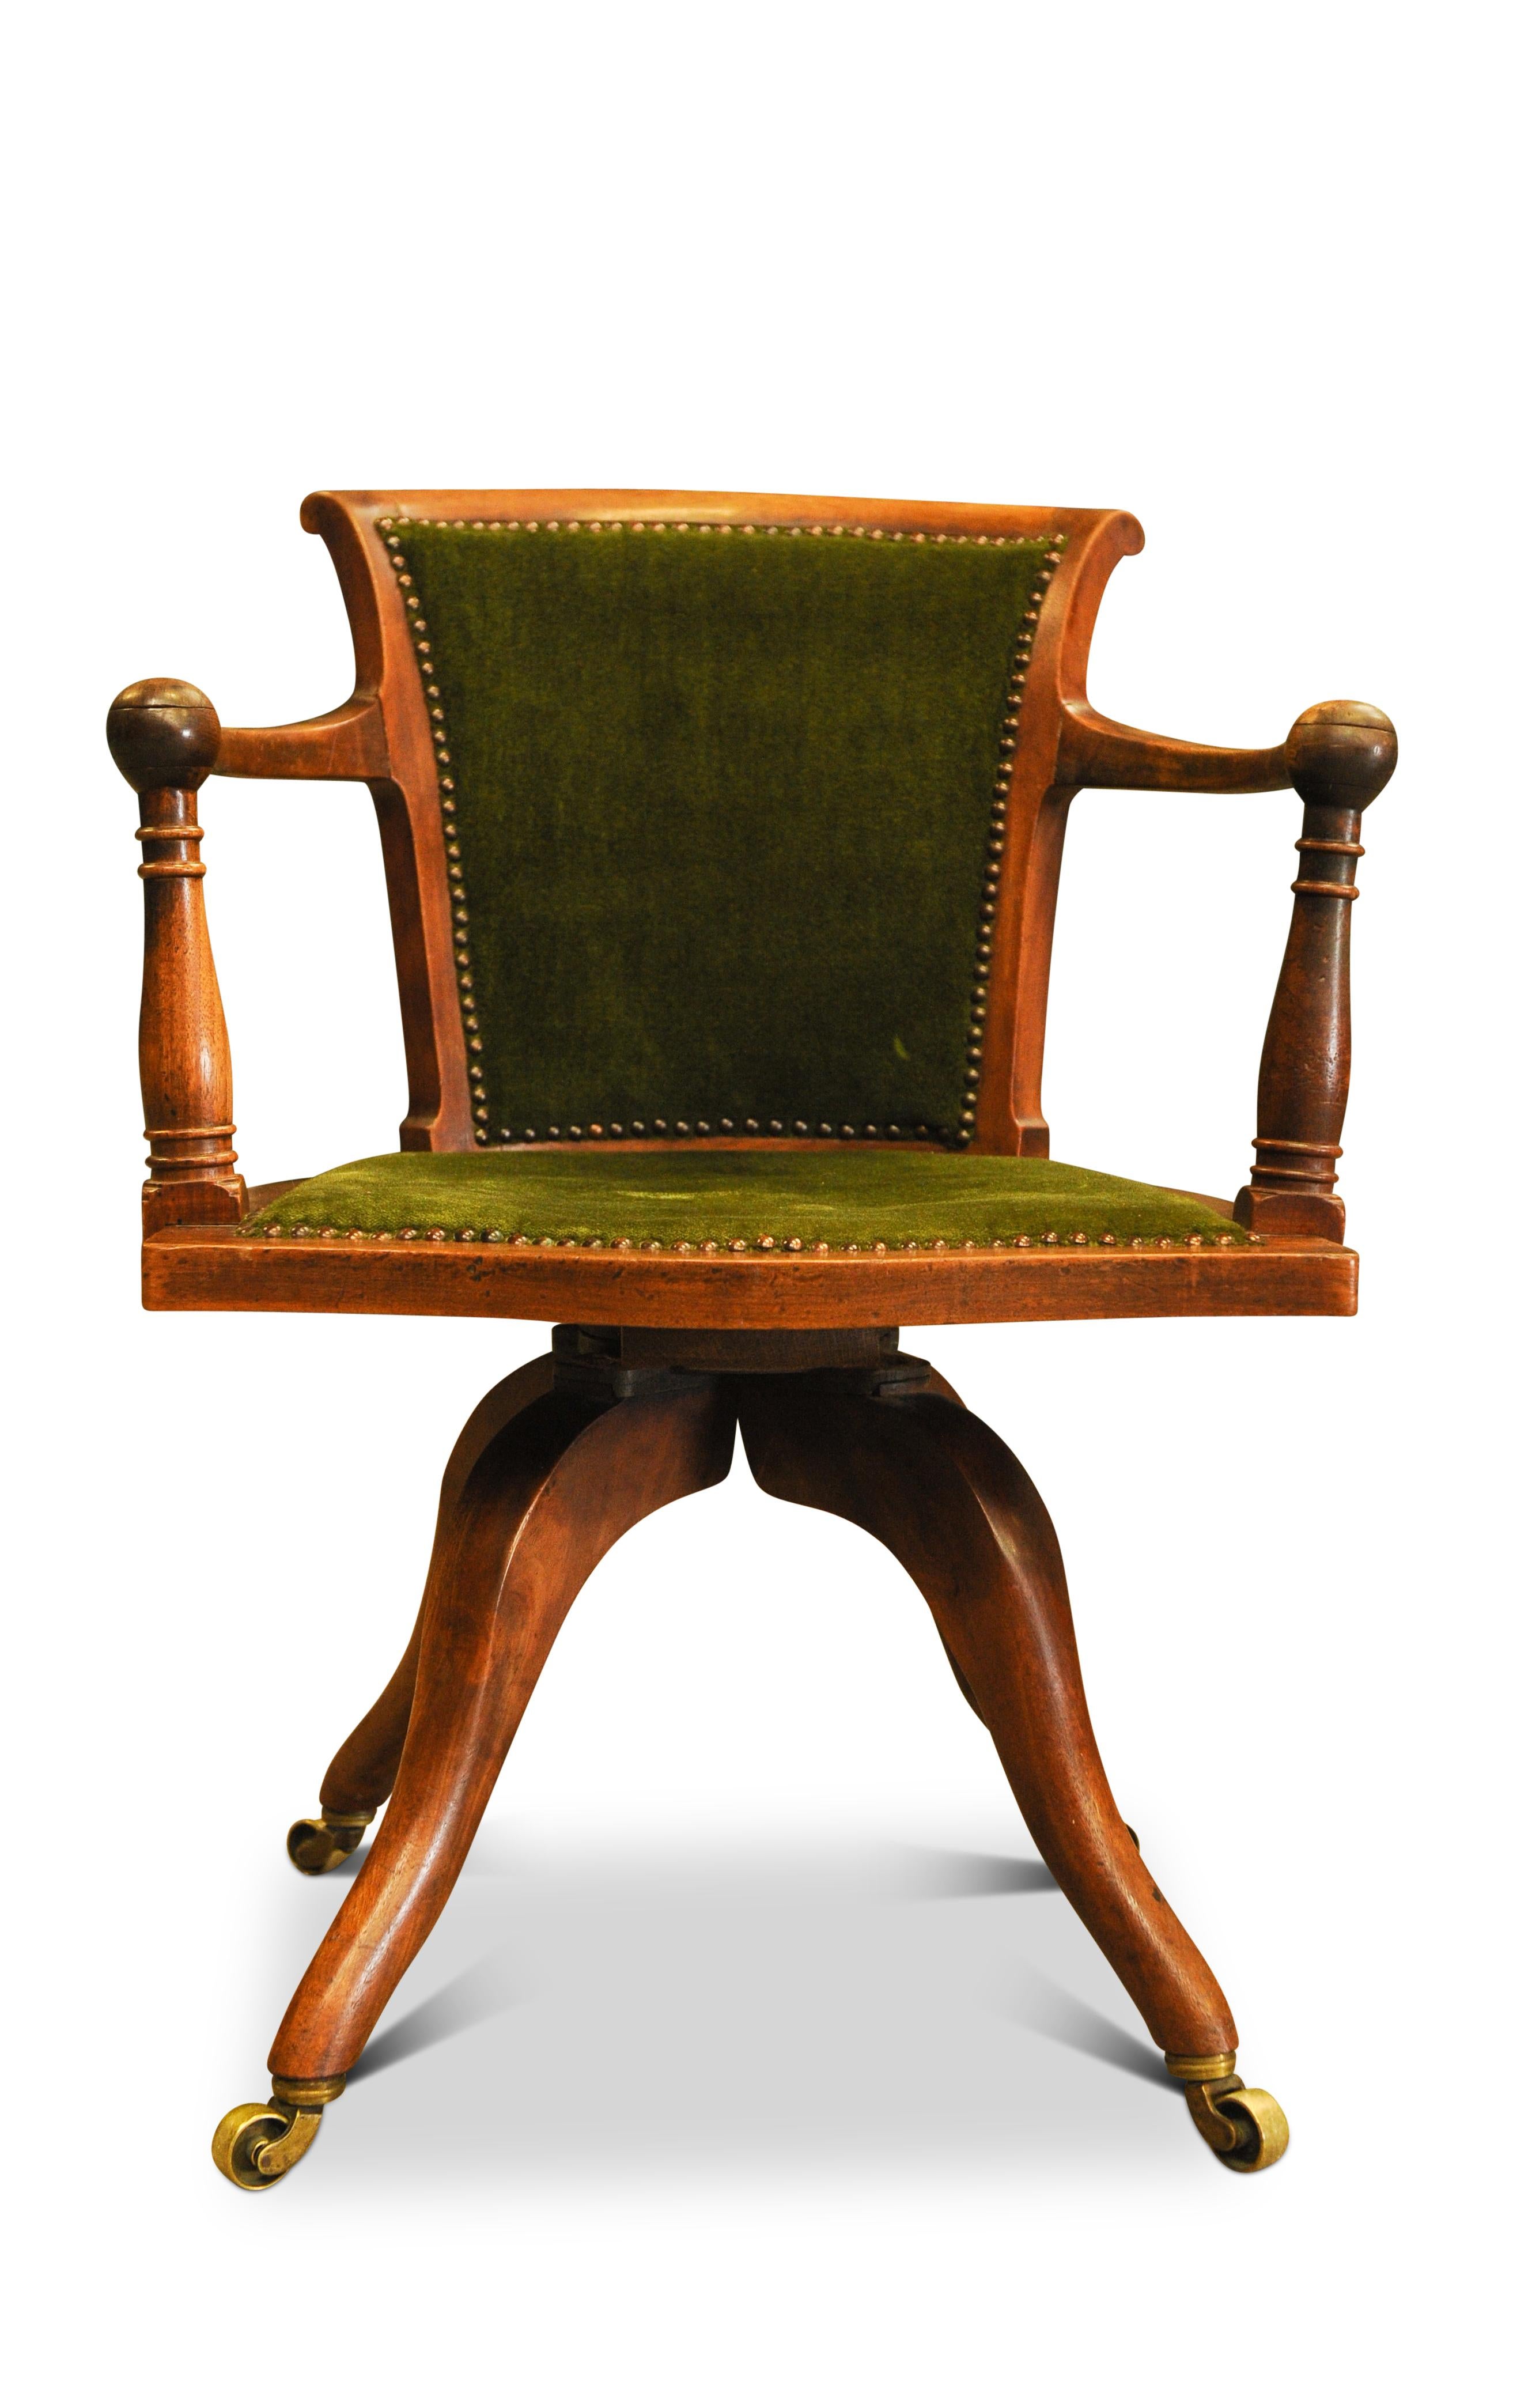 jas shoolbred chair